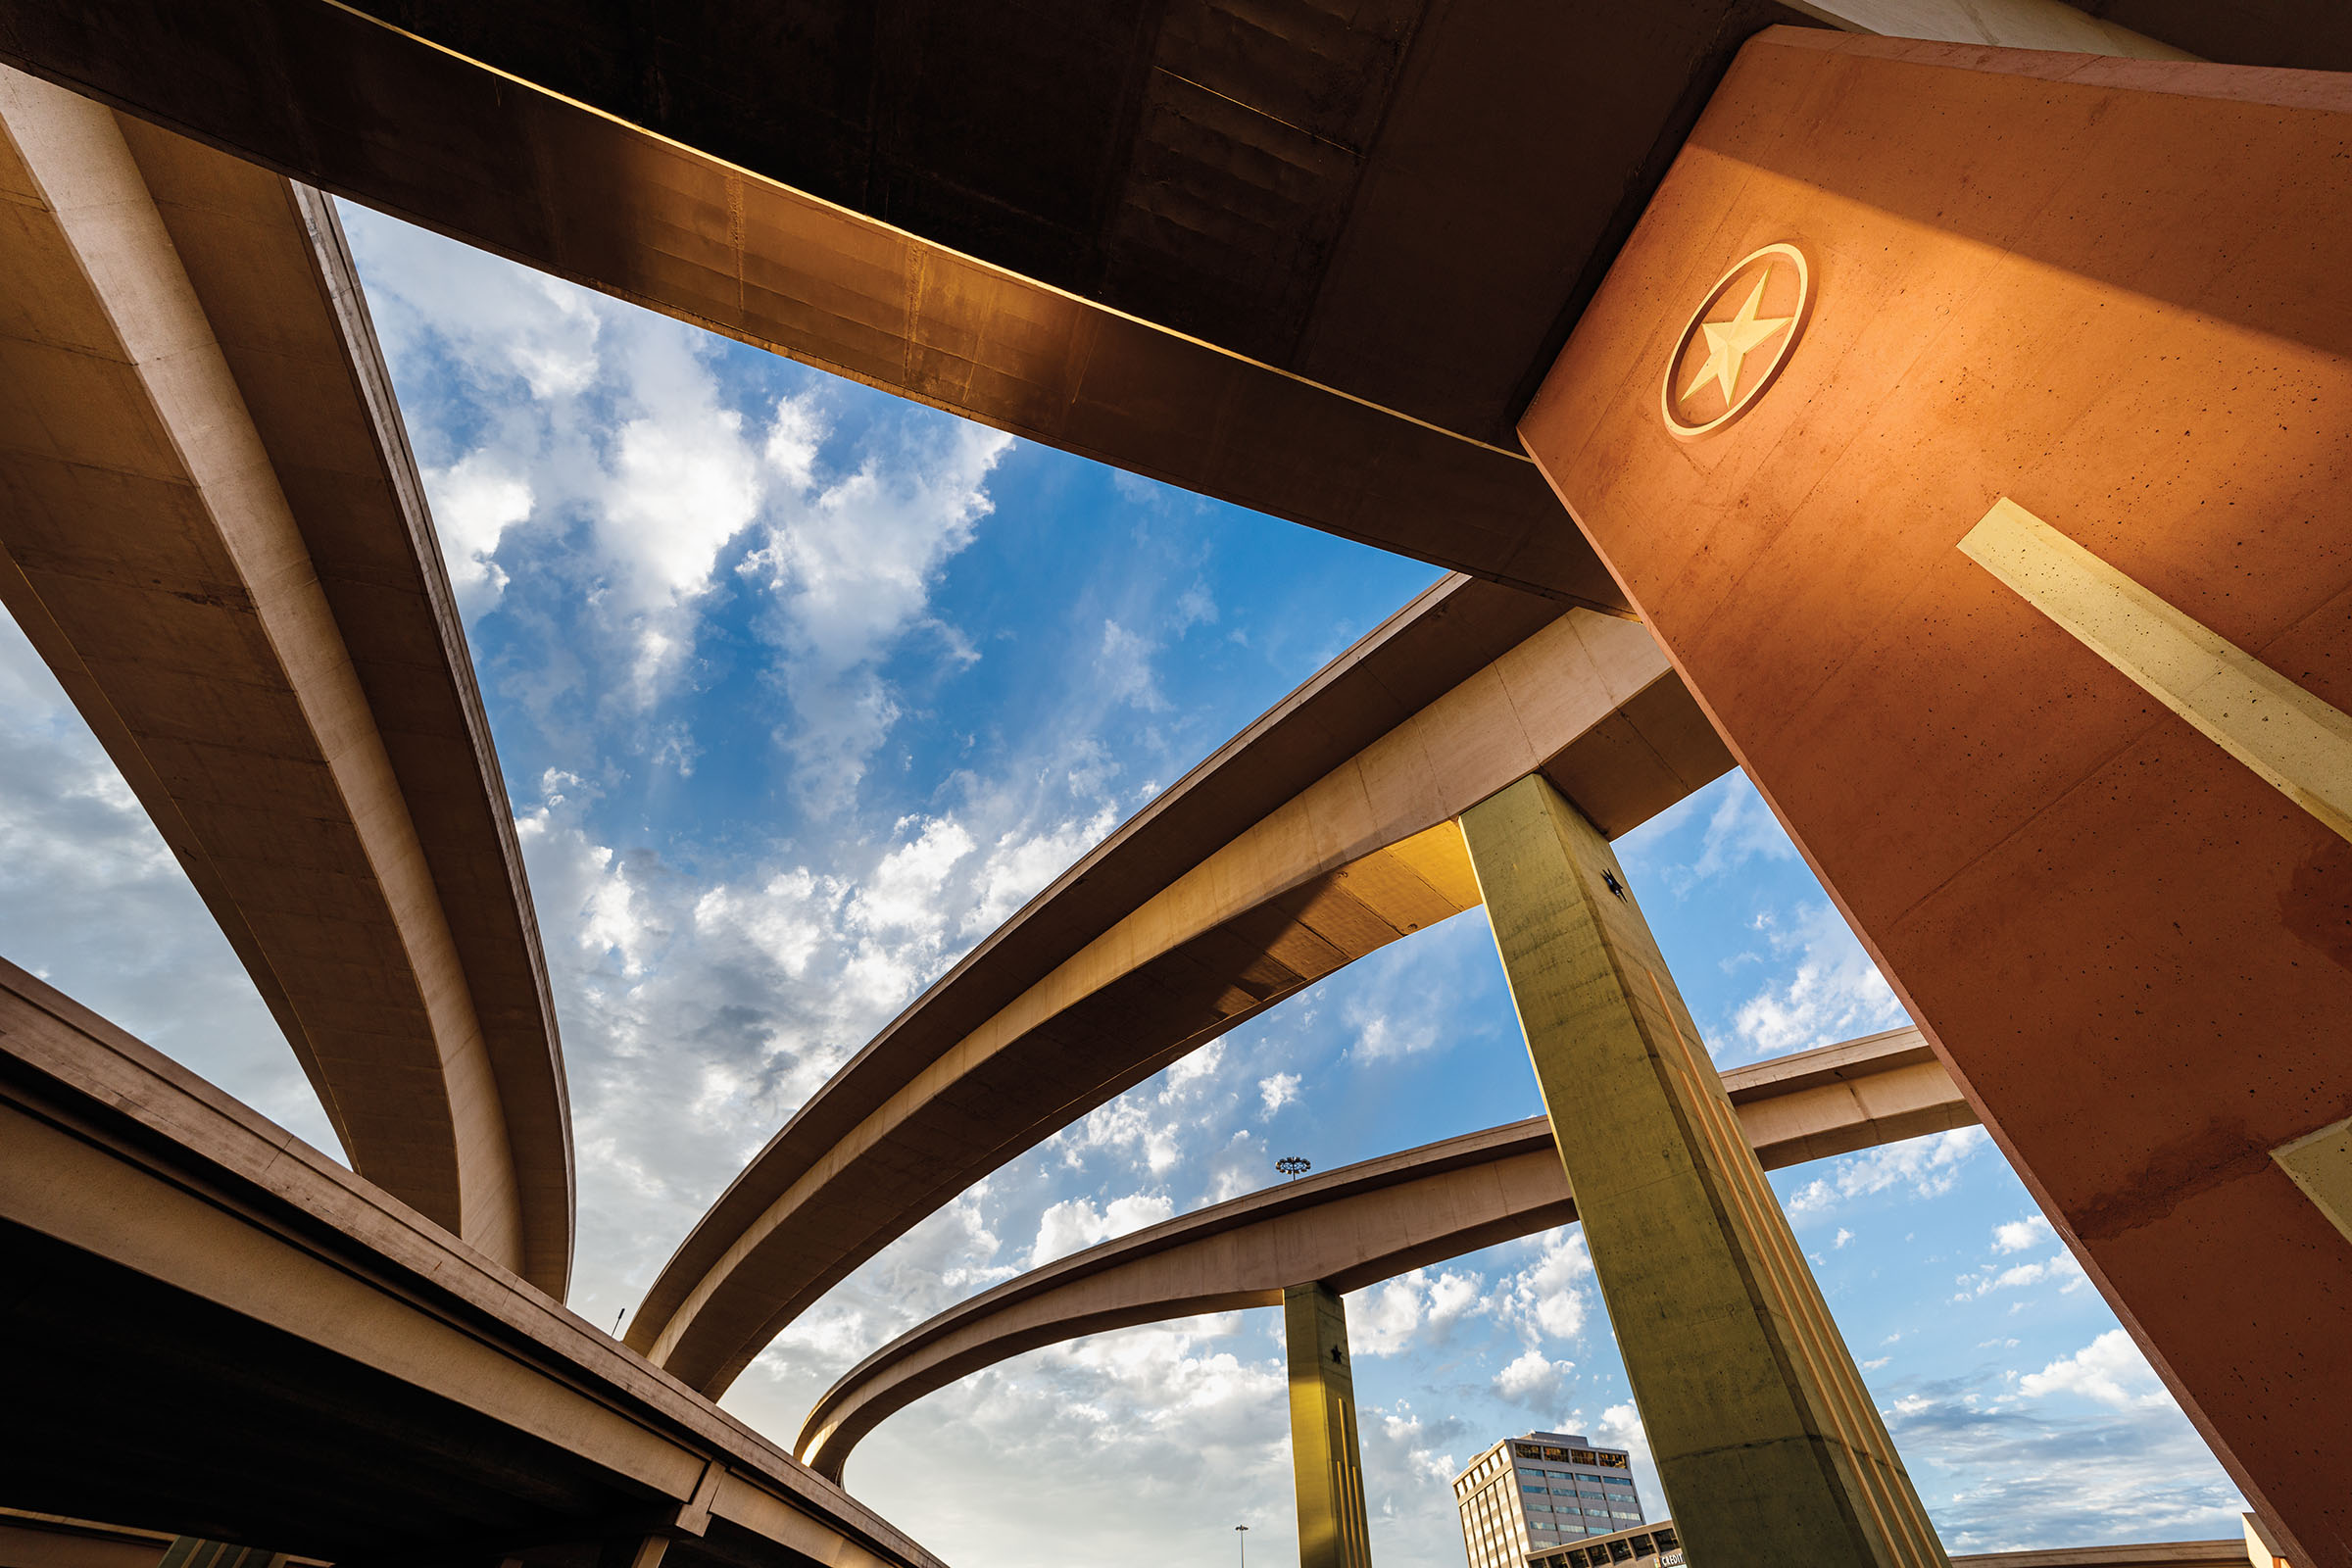 Tall, concreate overpasses and flyovers beneath a blue sky with clouds